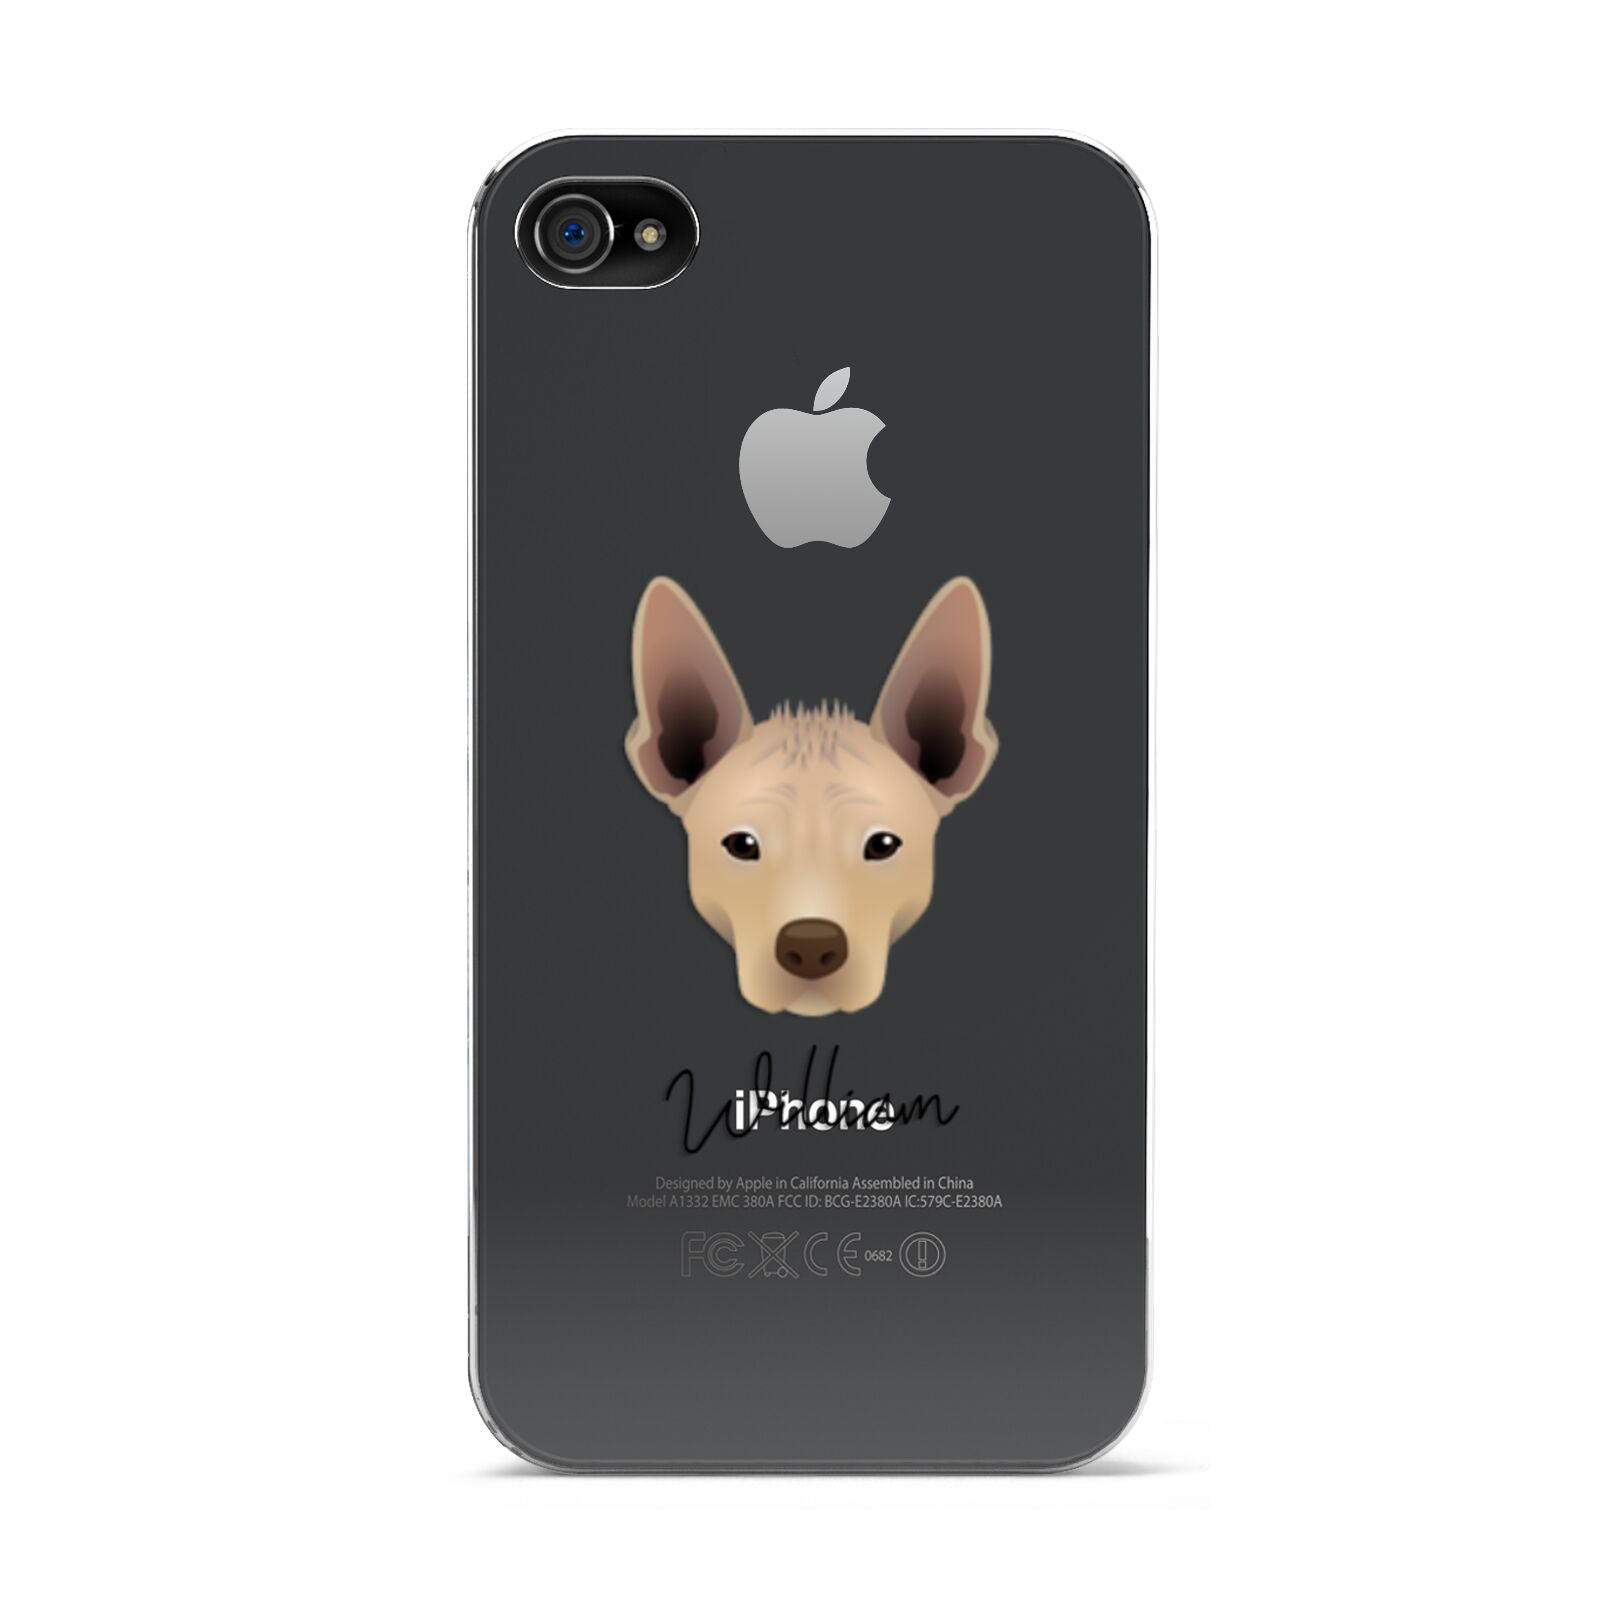 Mexican Hairless Personalised Apple iPhone 4s Case